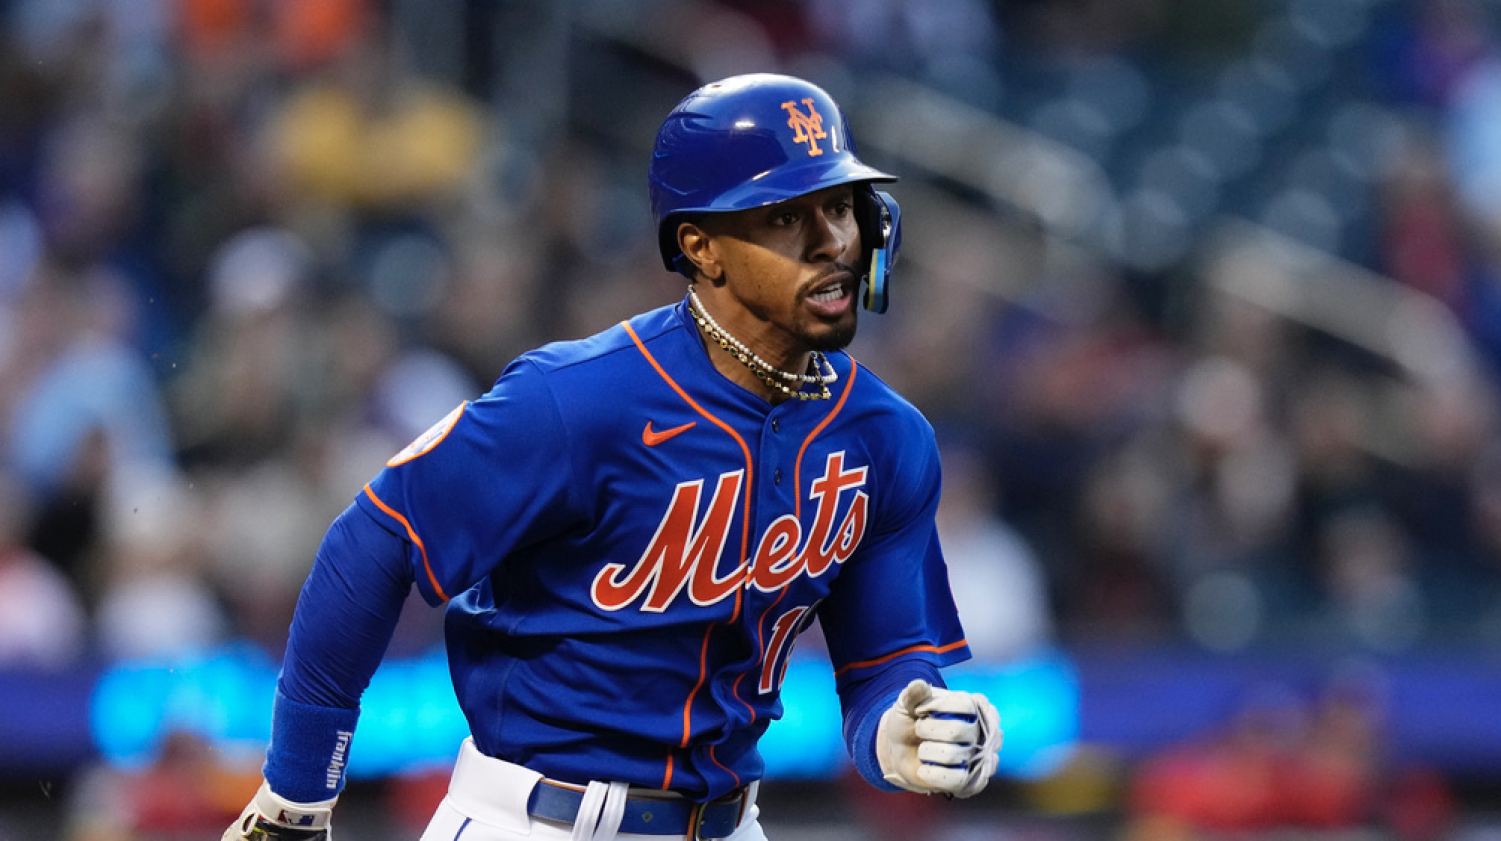 Mets' Francisco Lindor may end up being worth $341 million